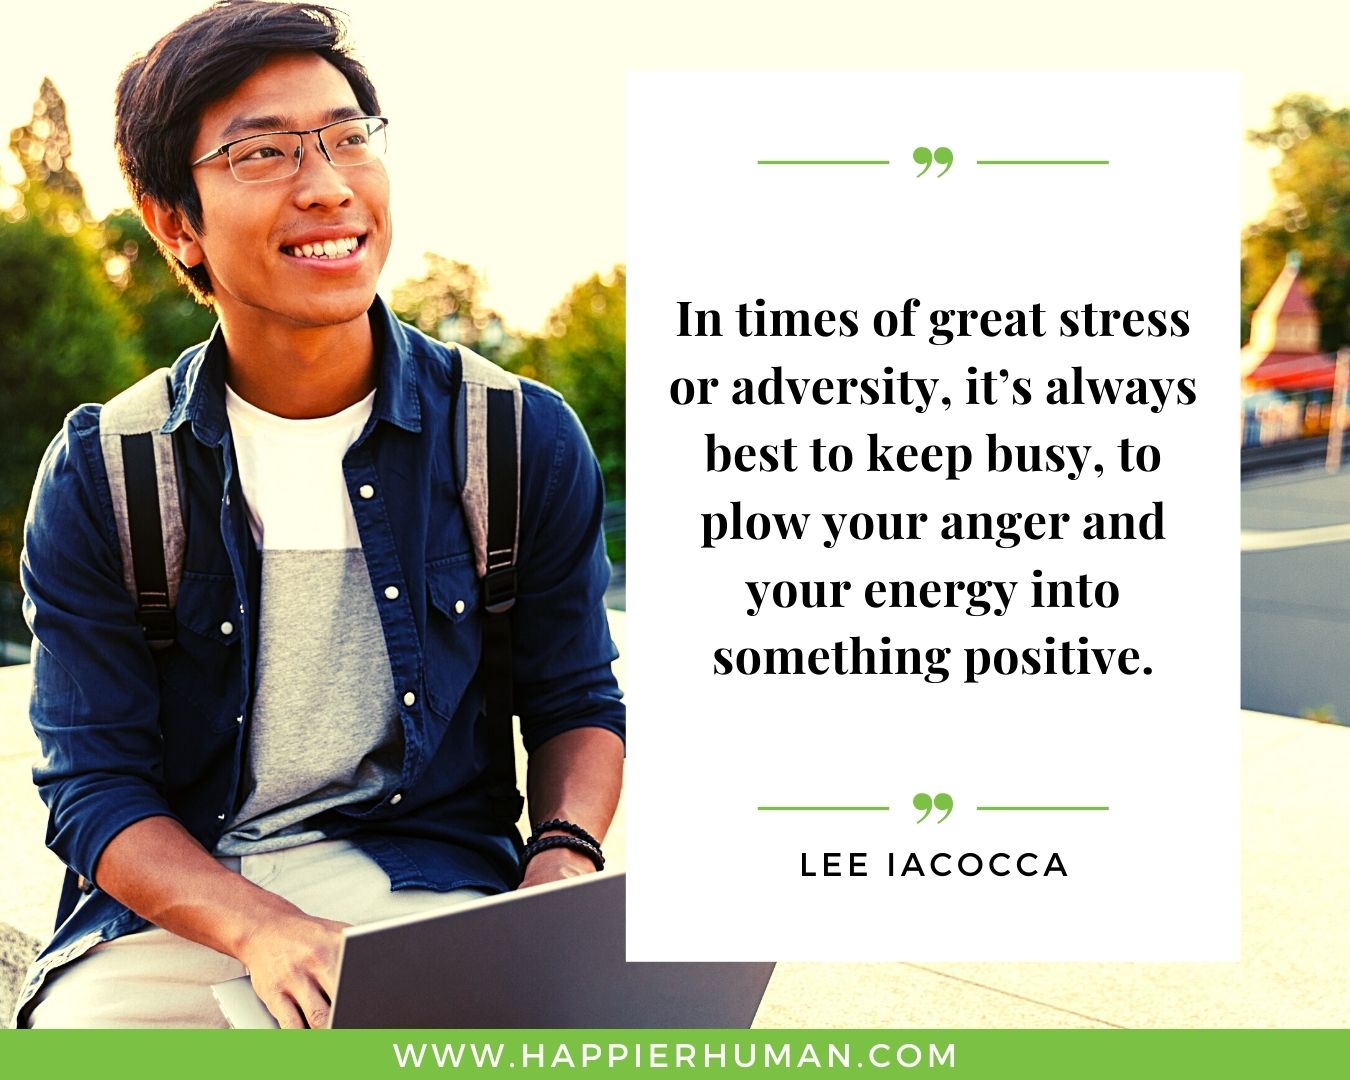 Positive Energy Quotes - “In times of great stress or adversity, it’s always best to keep busy, to plow your anger and your energy into something positive.” - Lee Iacocca